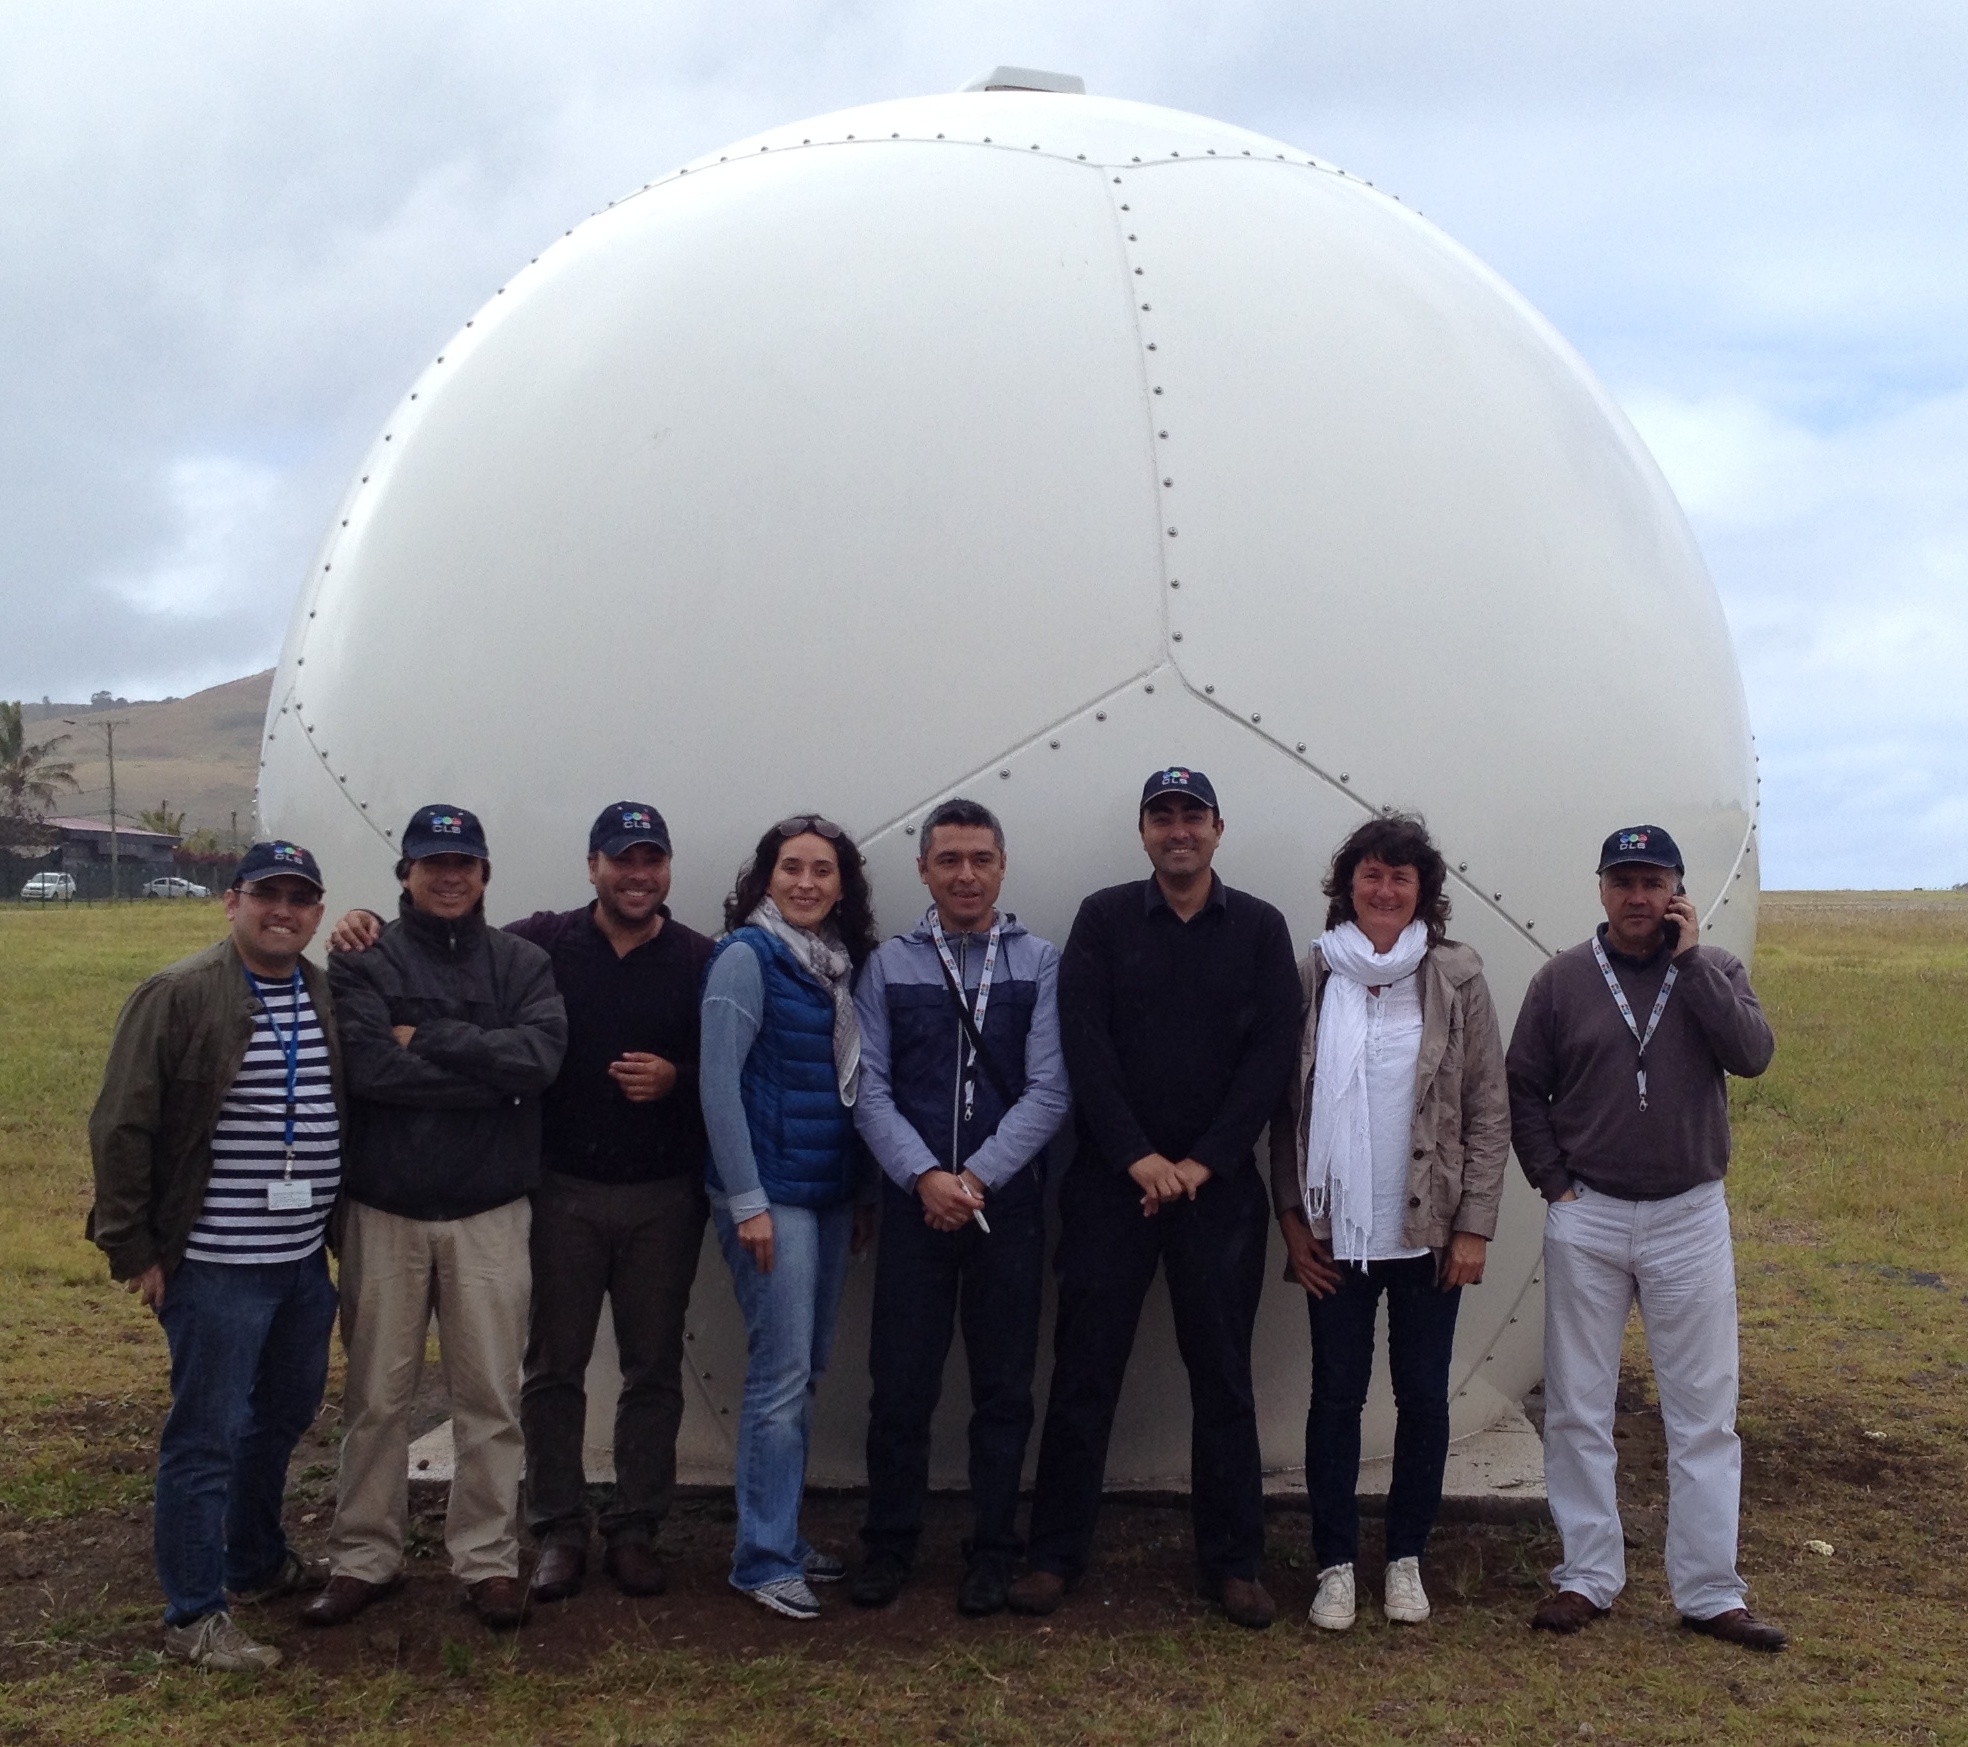 CLS CNES Meteo Chile Easter island IMG_4278sm